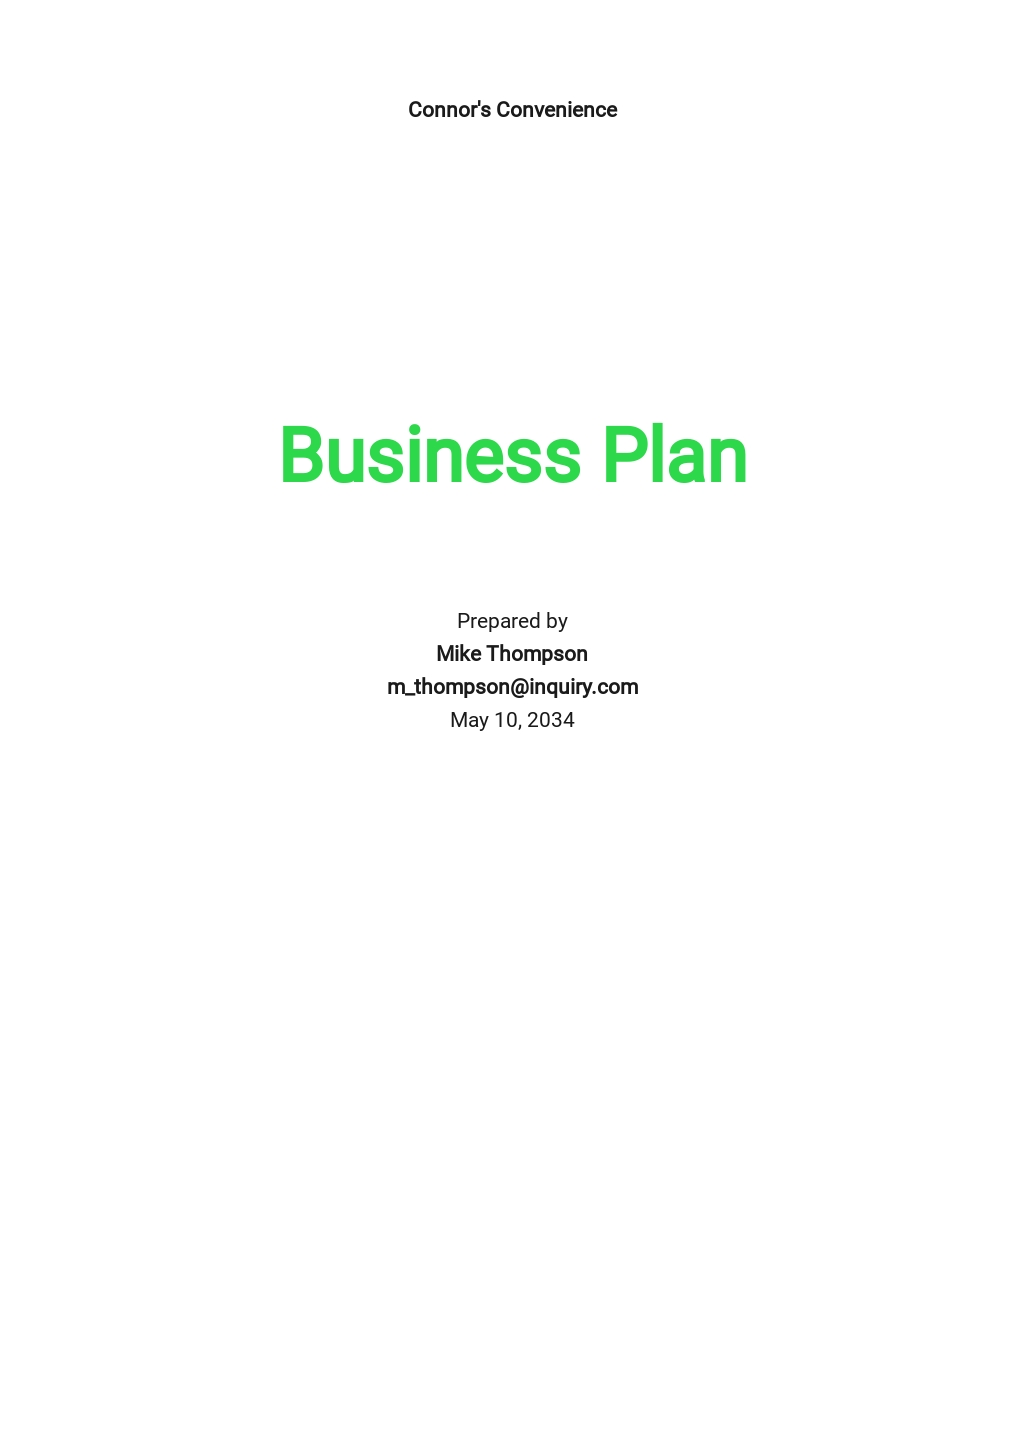 business plan for convenience store pdf